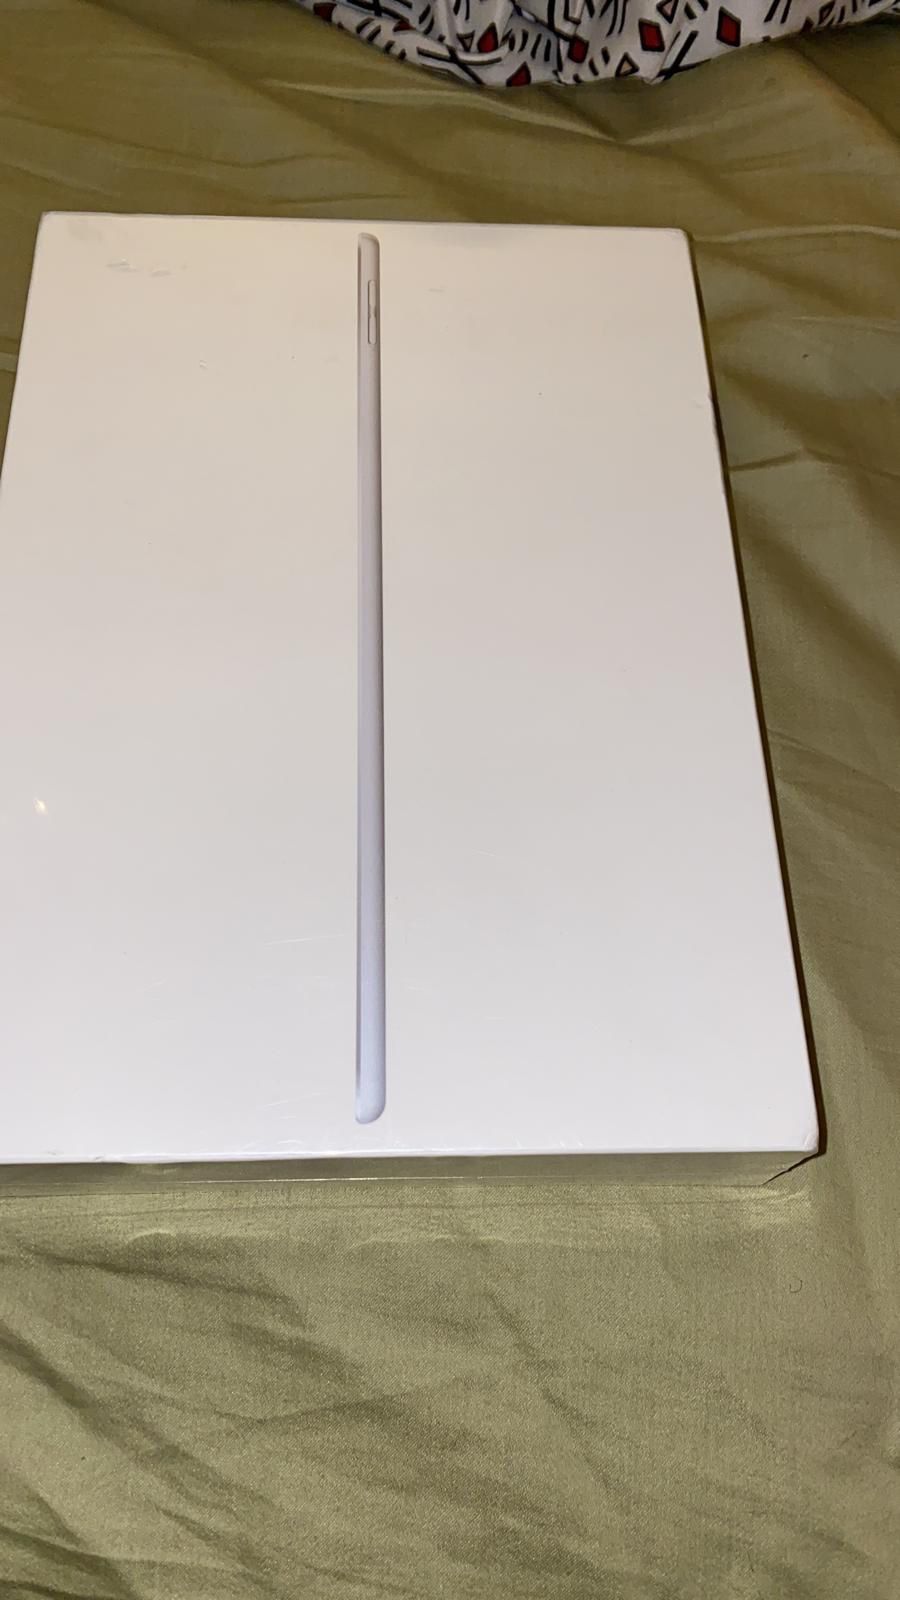 BRAND NEW IPAD 6 GENERATIONS WIFI AND 4G LTE NEW FROM APPLE STORE $250